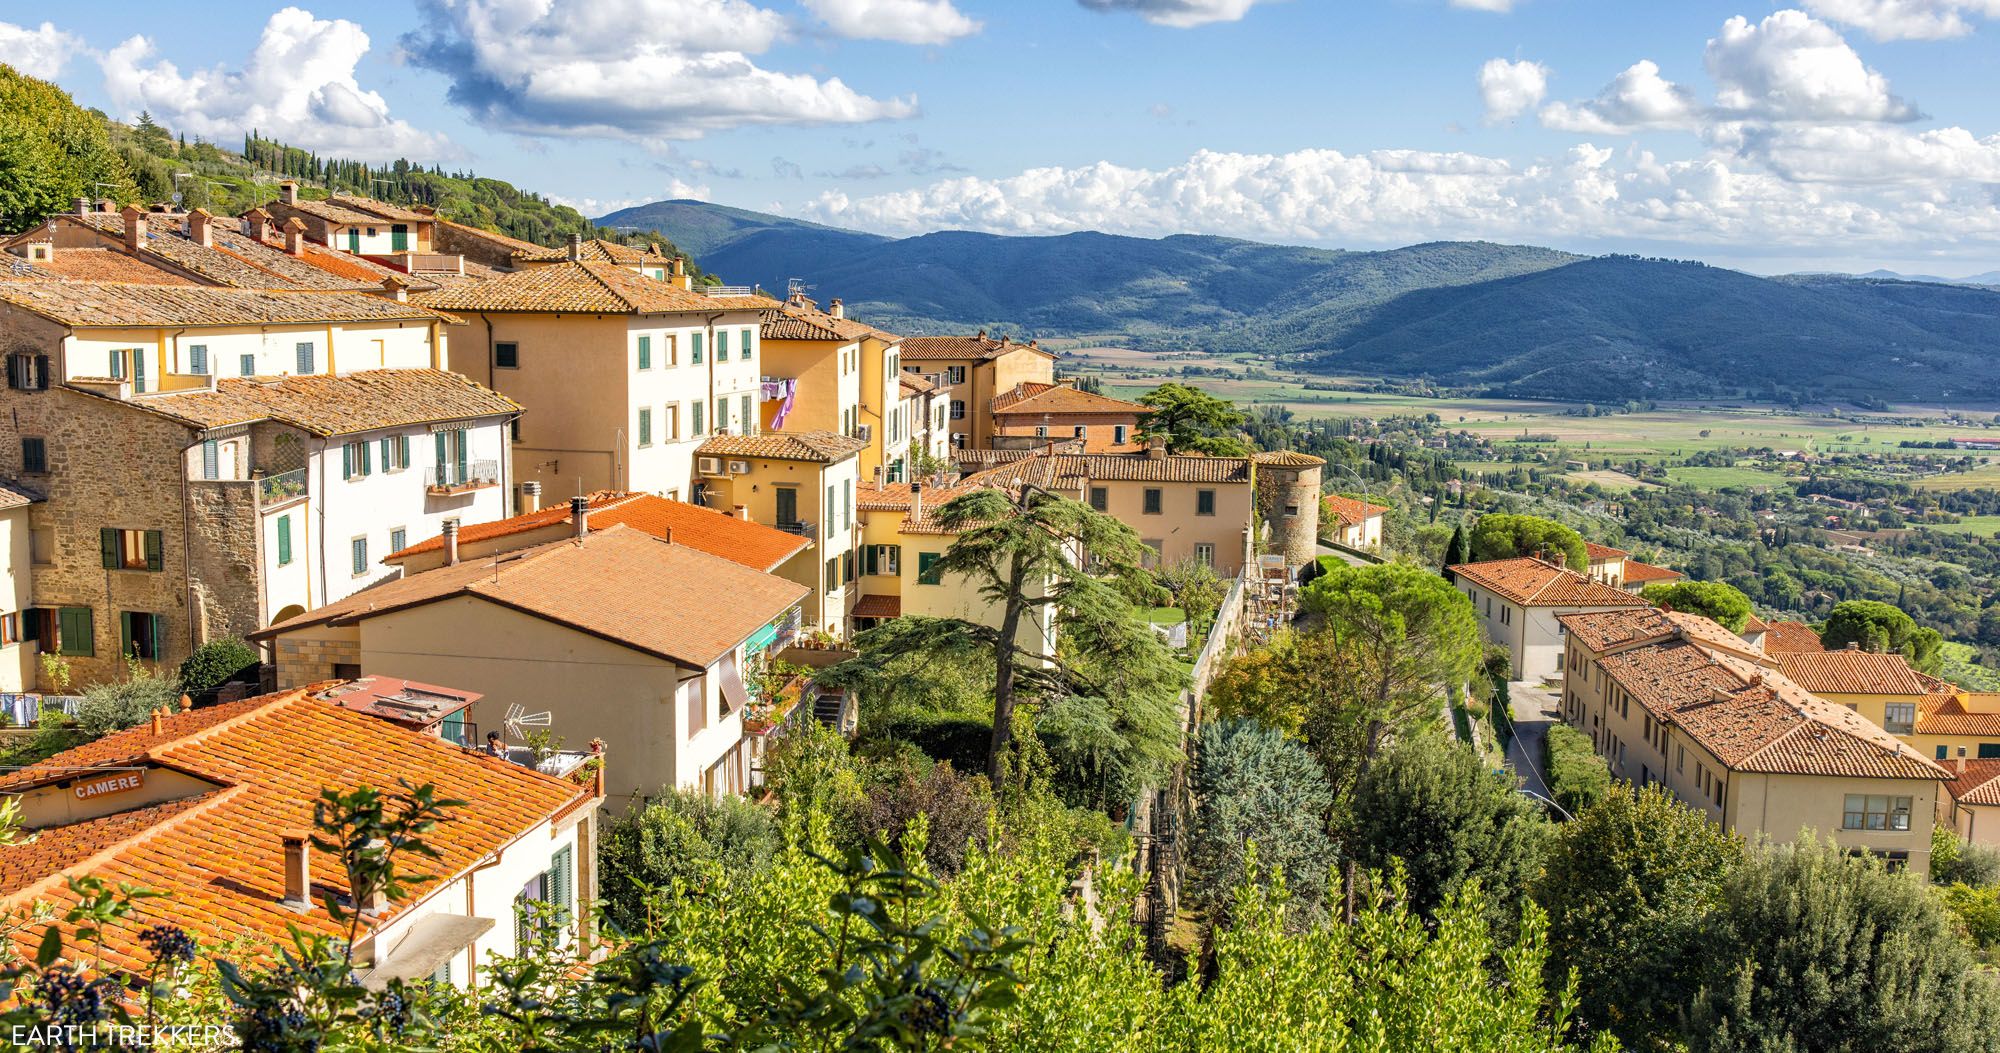 Featured image for “15 Best Things to Do in Cortona, Italy (+ HELPFUL Tips & Photos)”